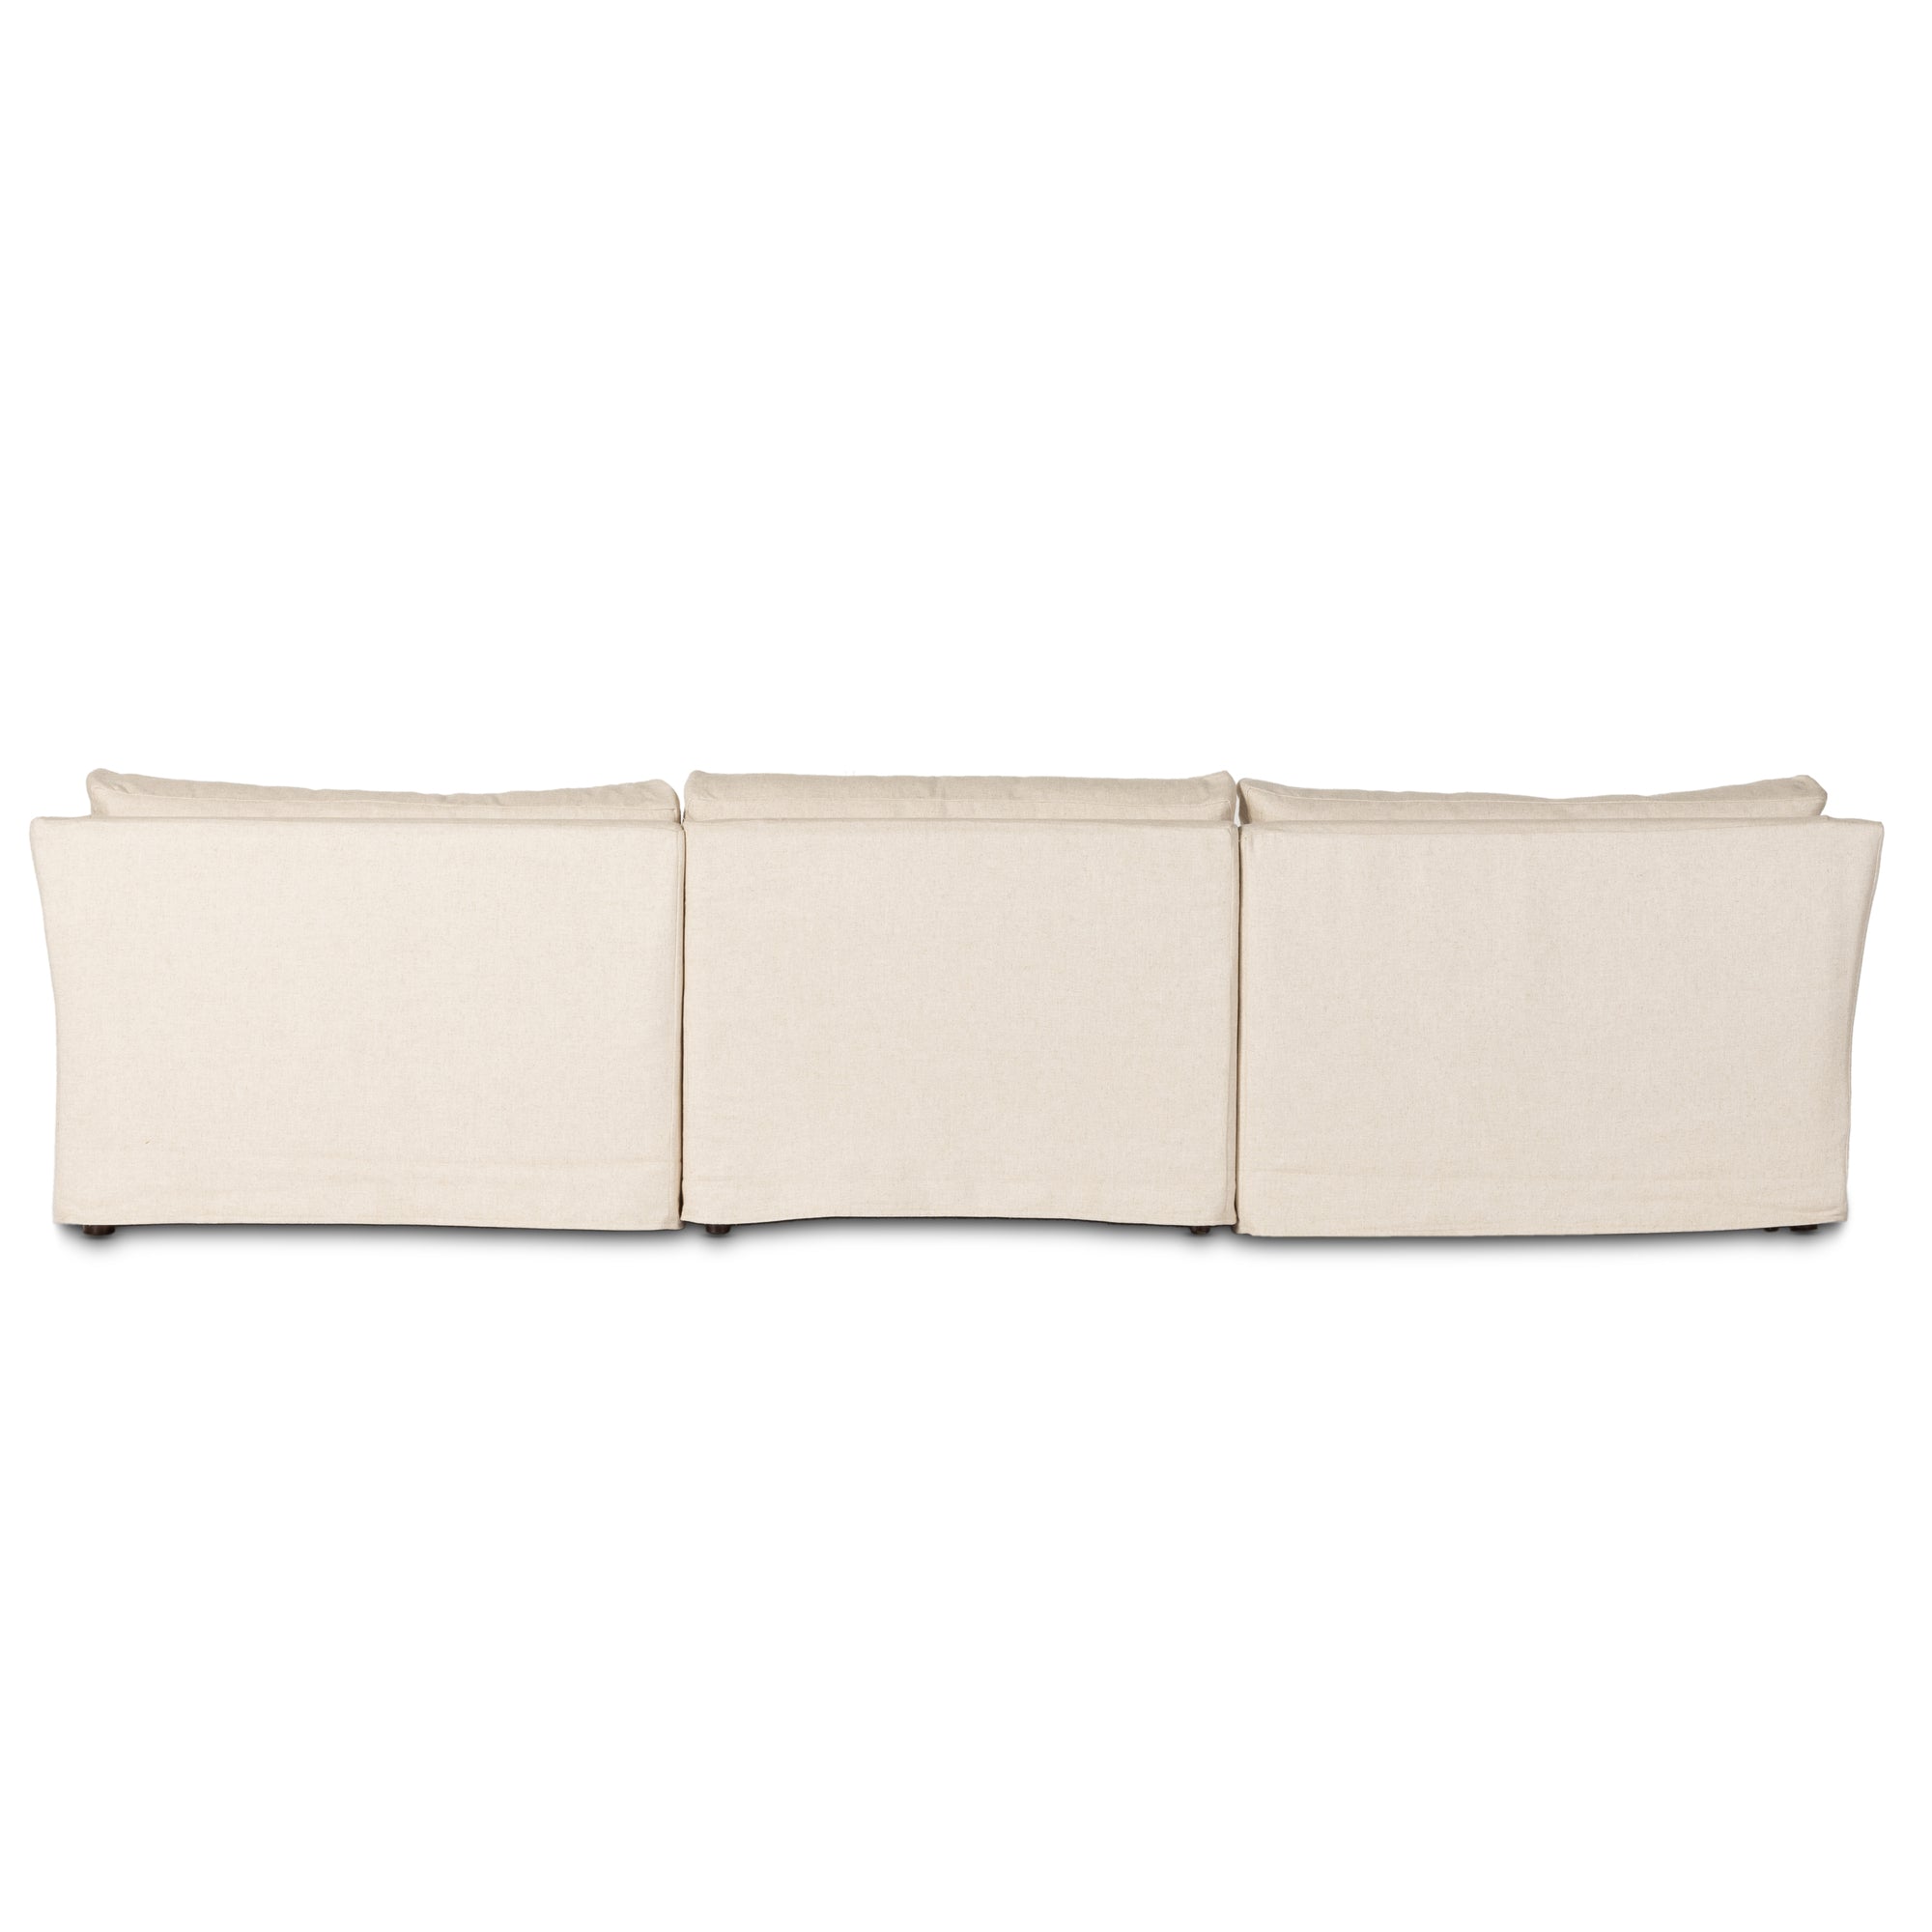 Delray 3-piece Slipcover Sectional